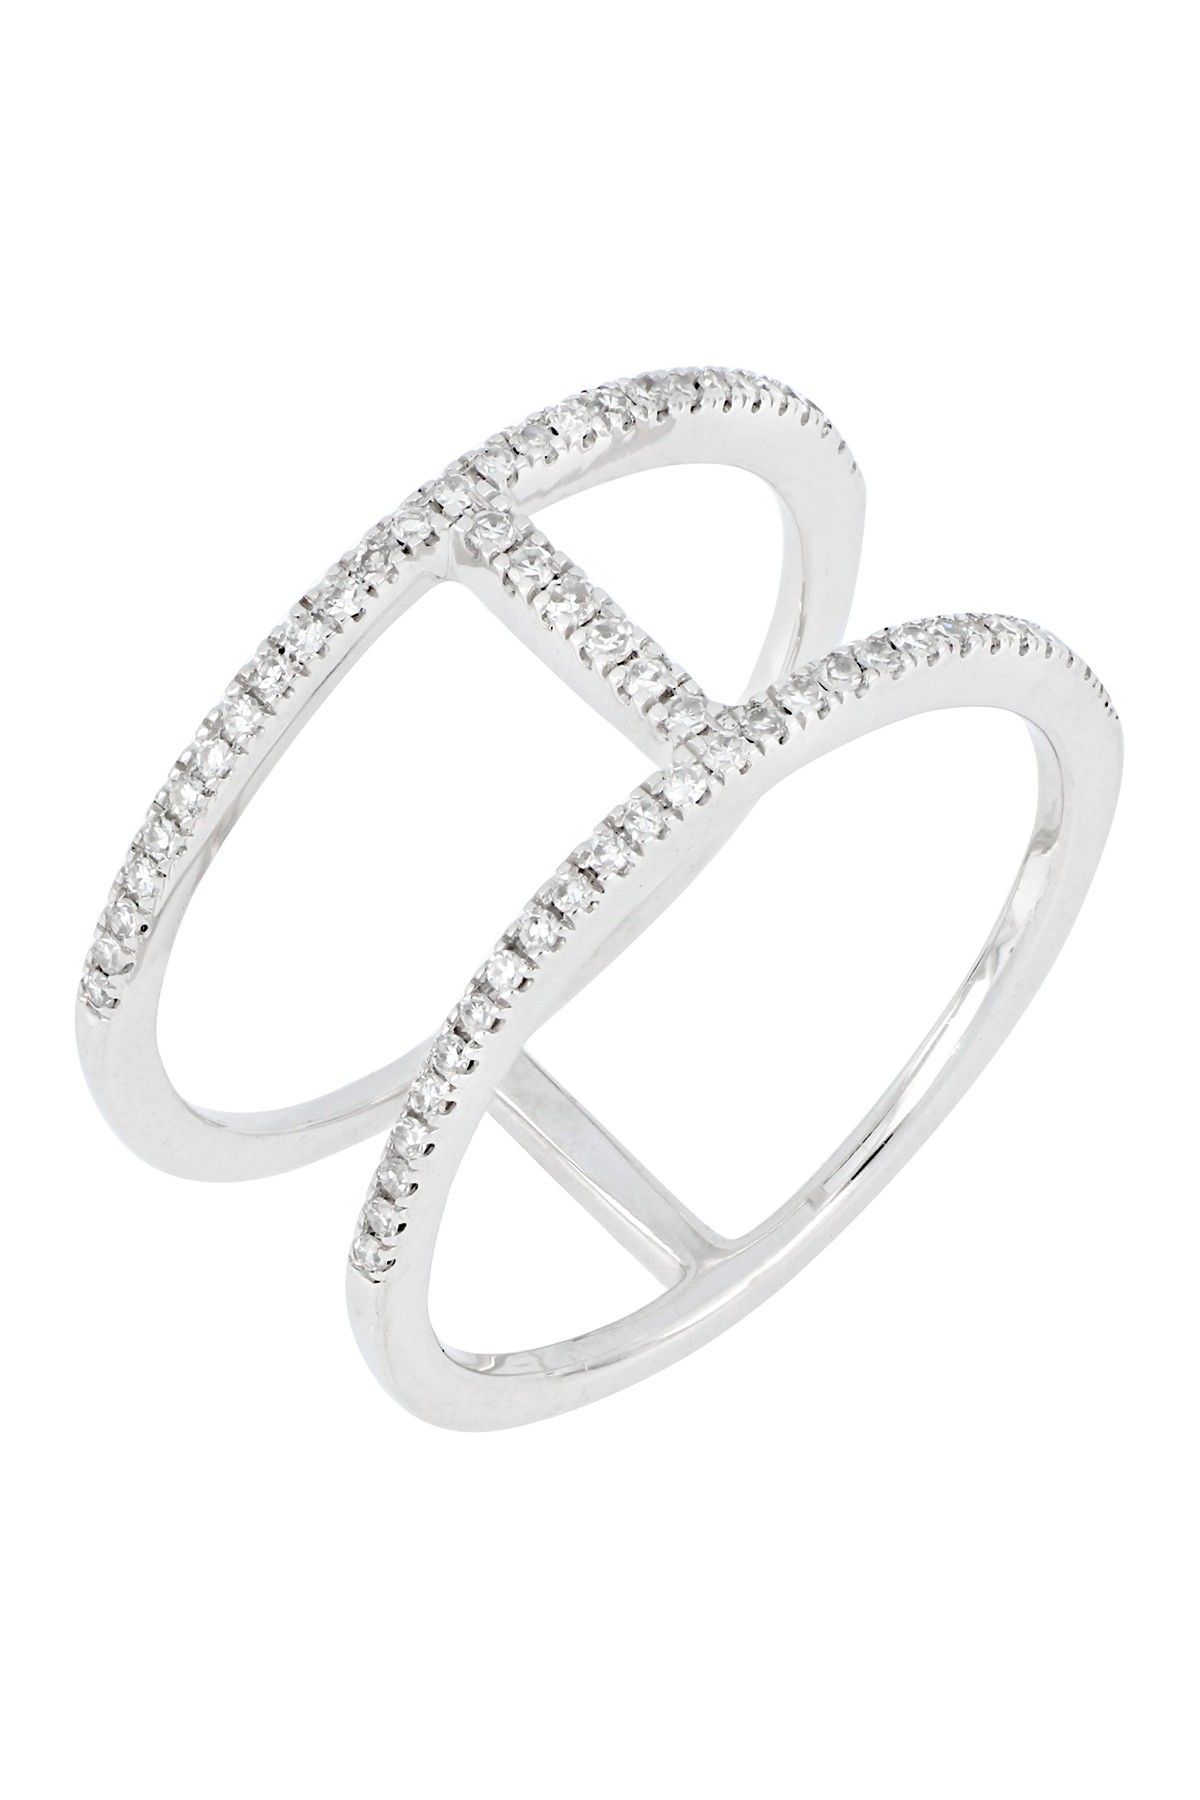 Carriere | Sterling Silver Pave Diamond Bar Ring –  (View 14 of 25)